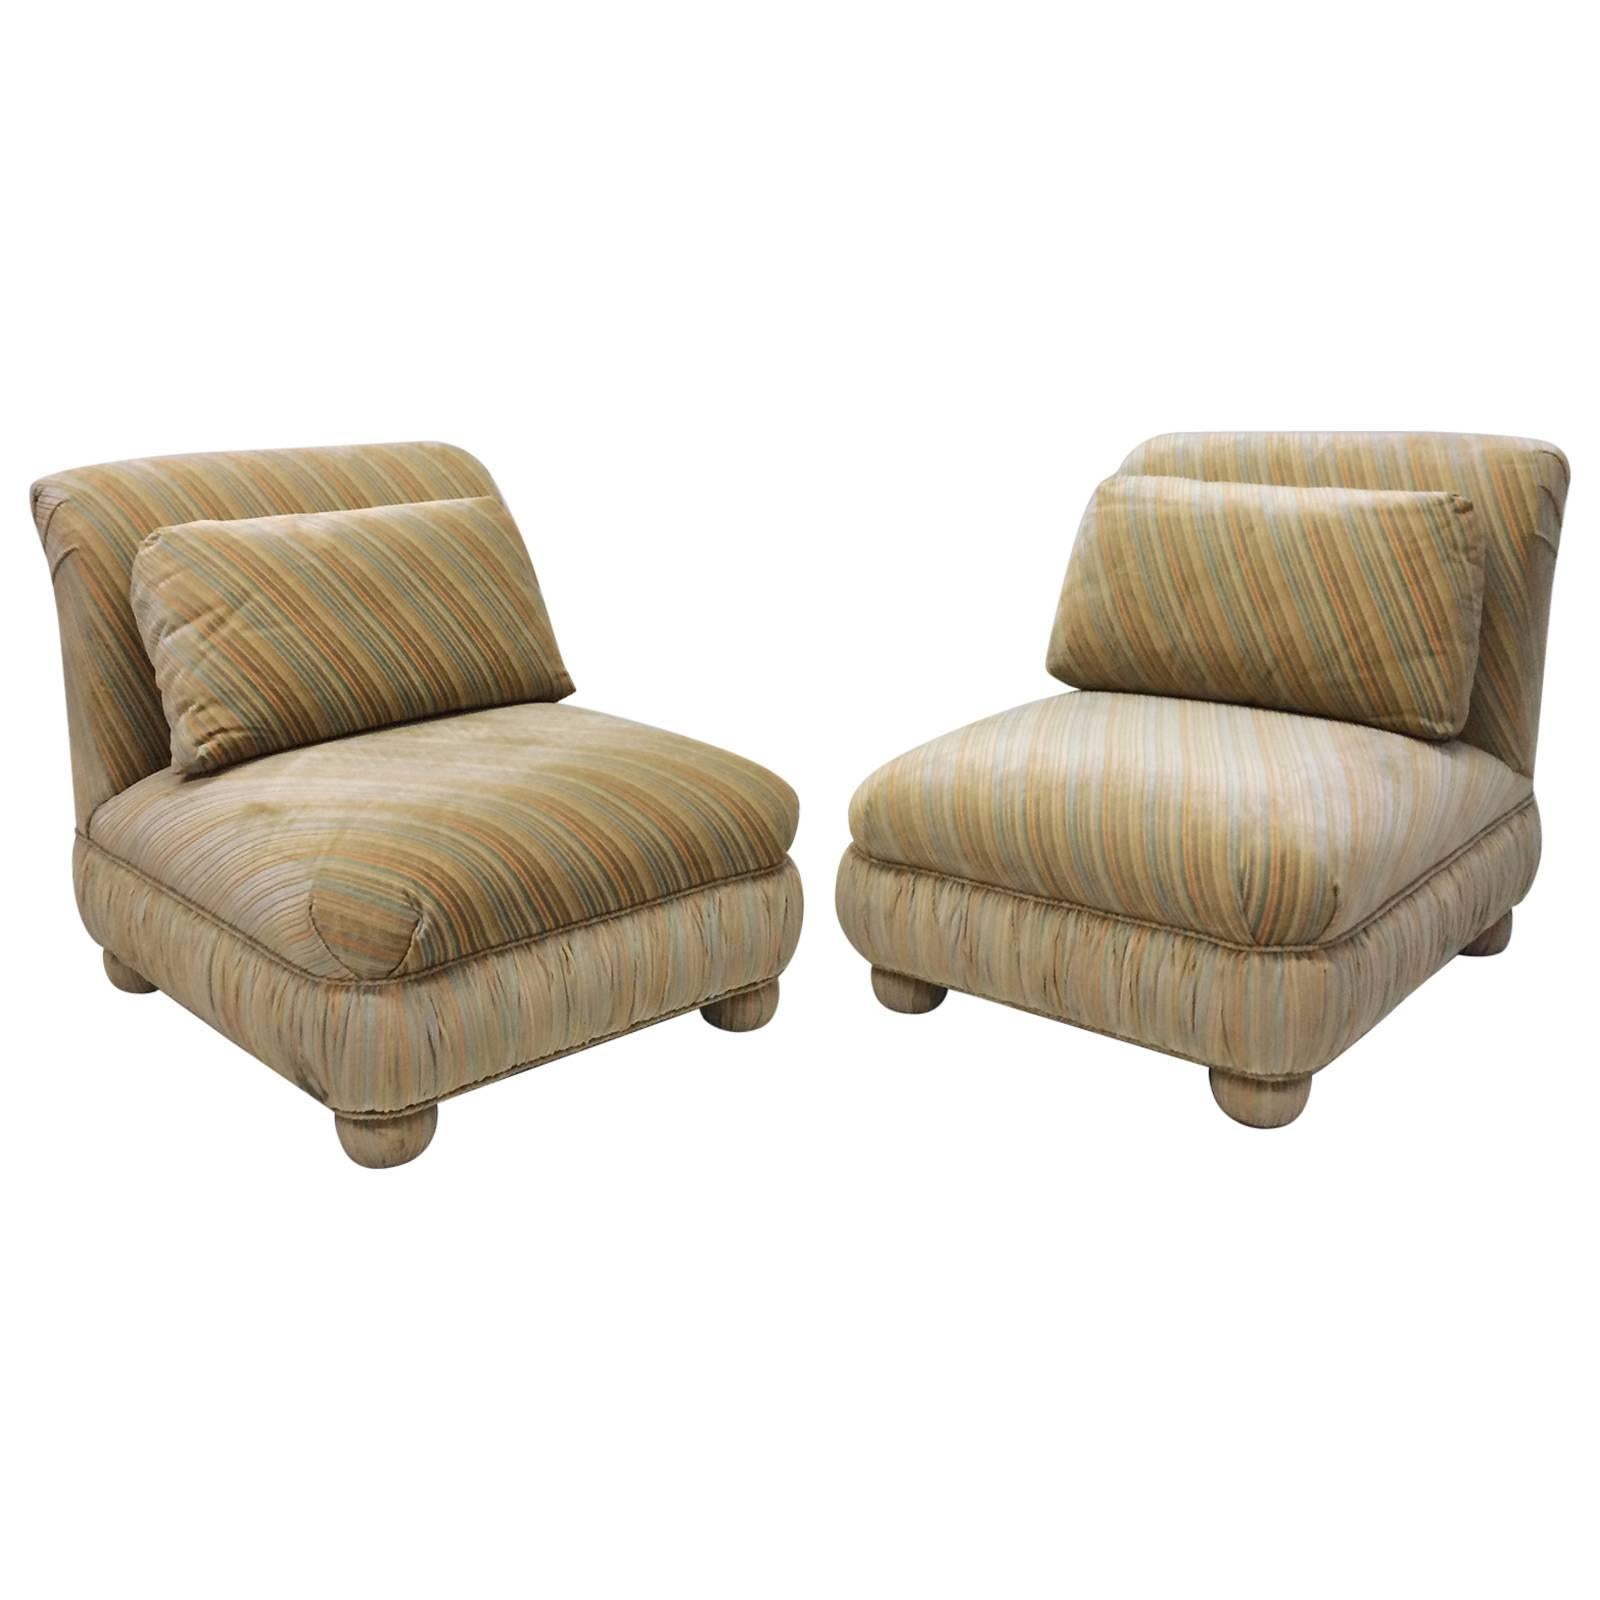 Pair of Slipper Chairs by Milo Baughman